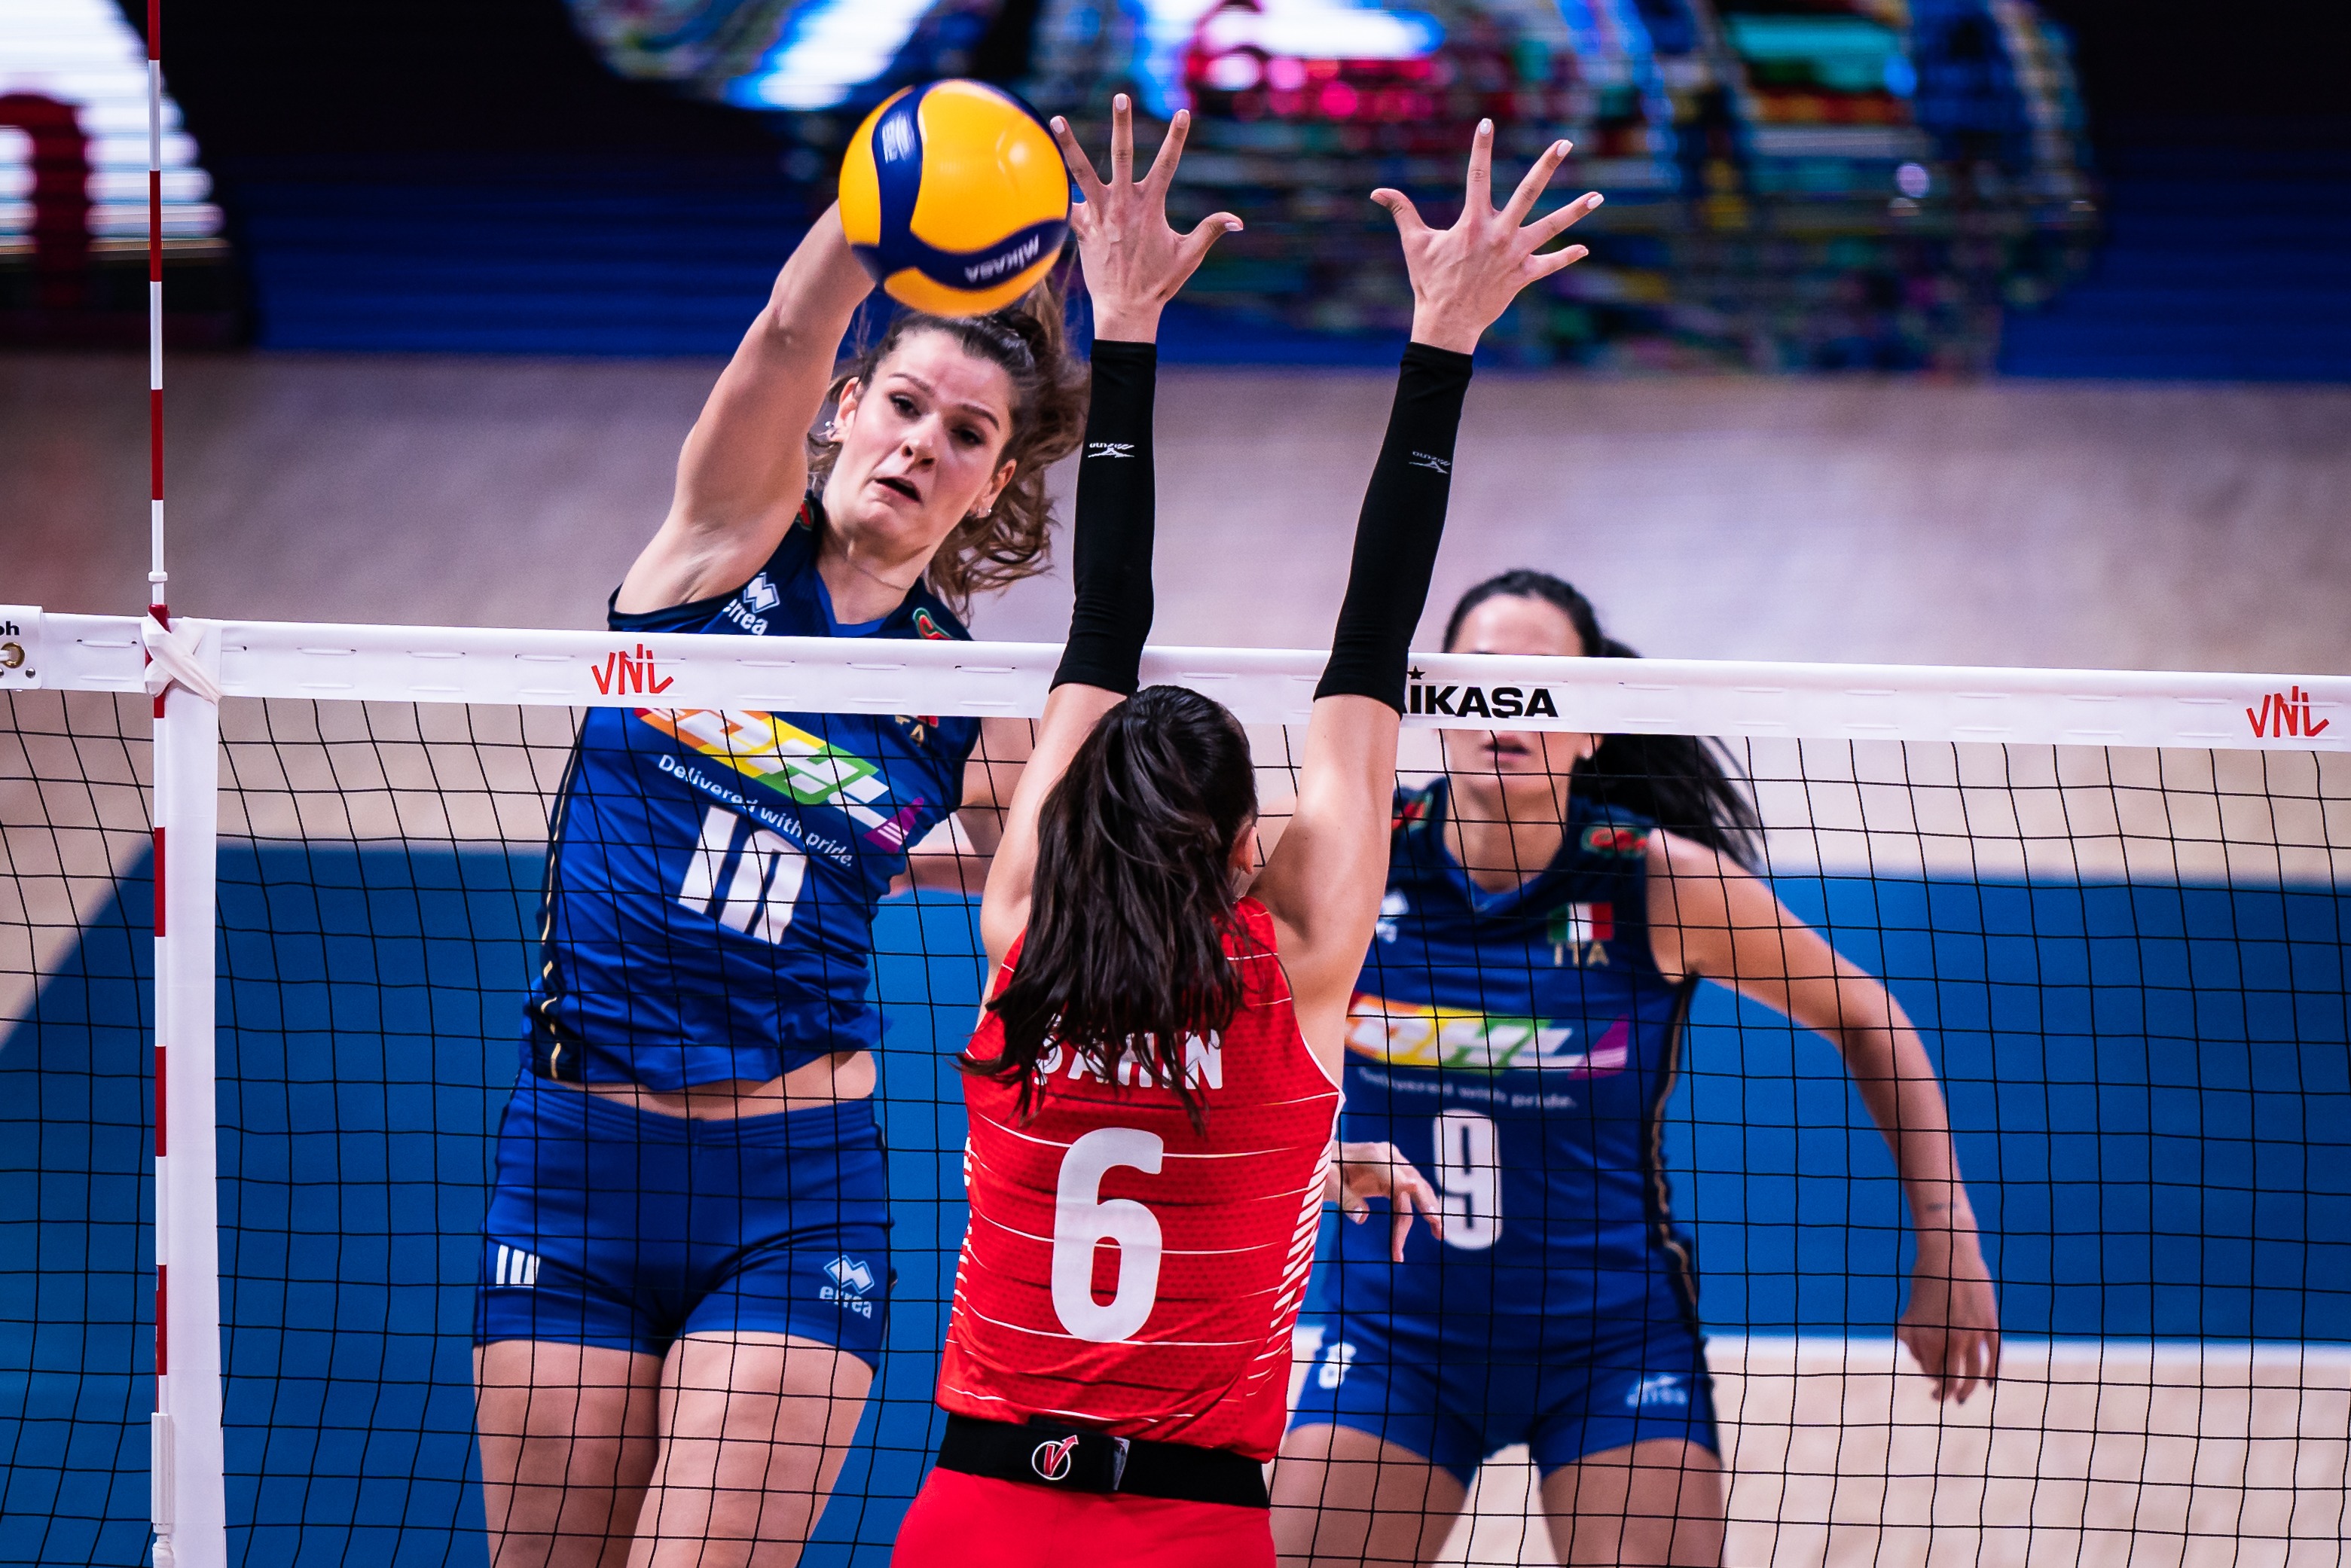 Italy aim for World Championship double volleyballworld